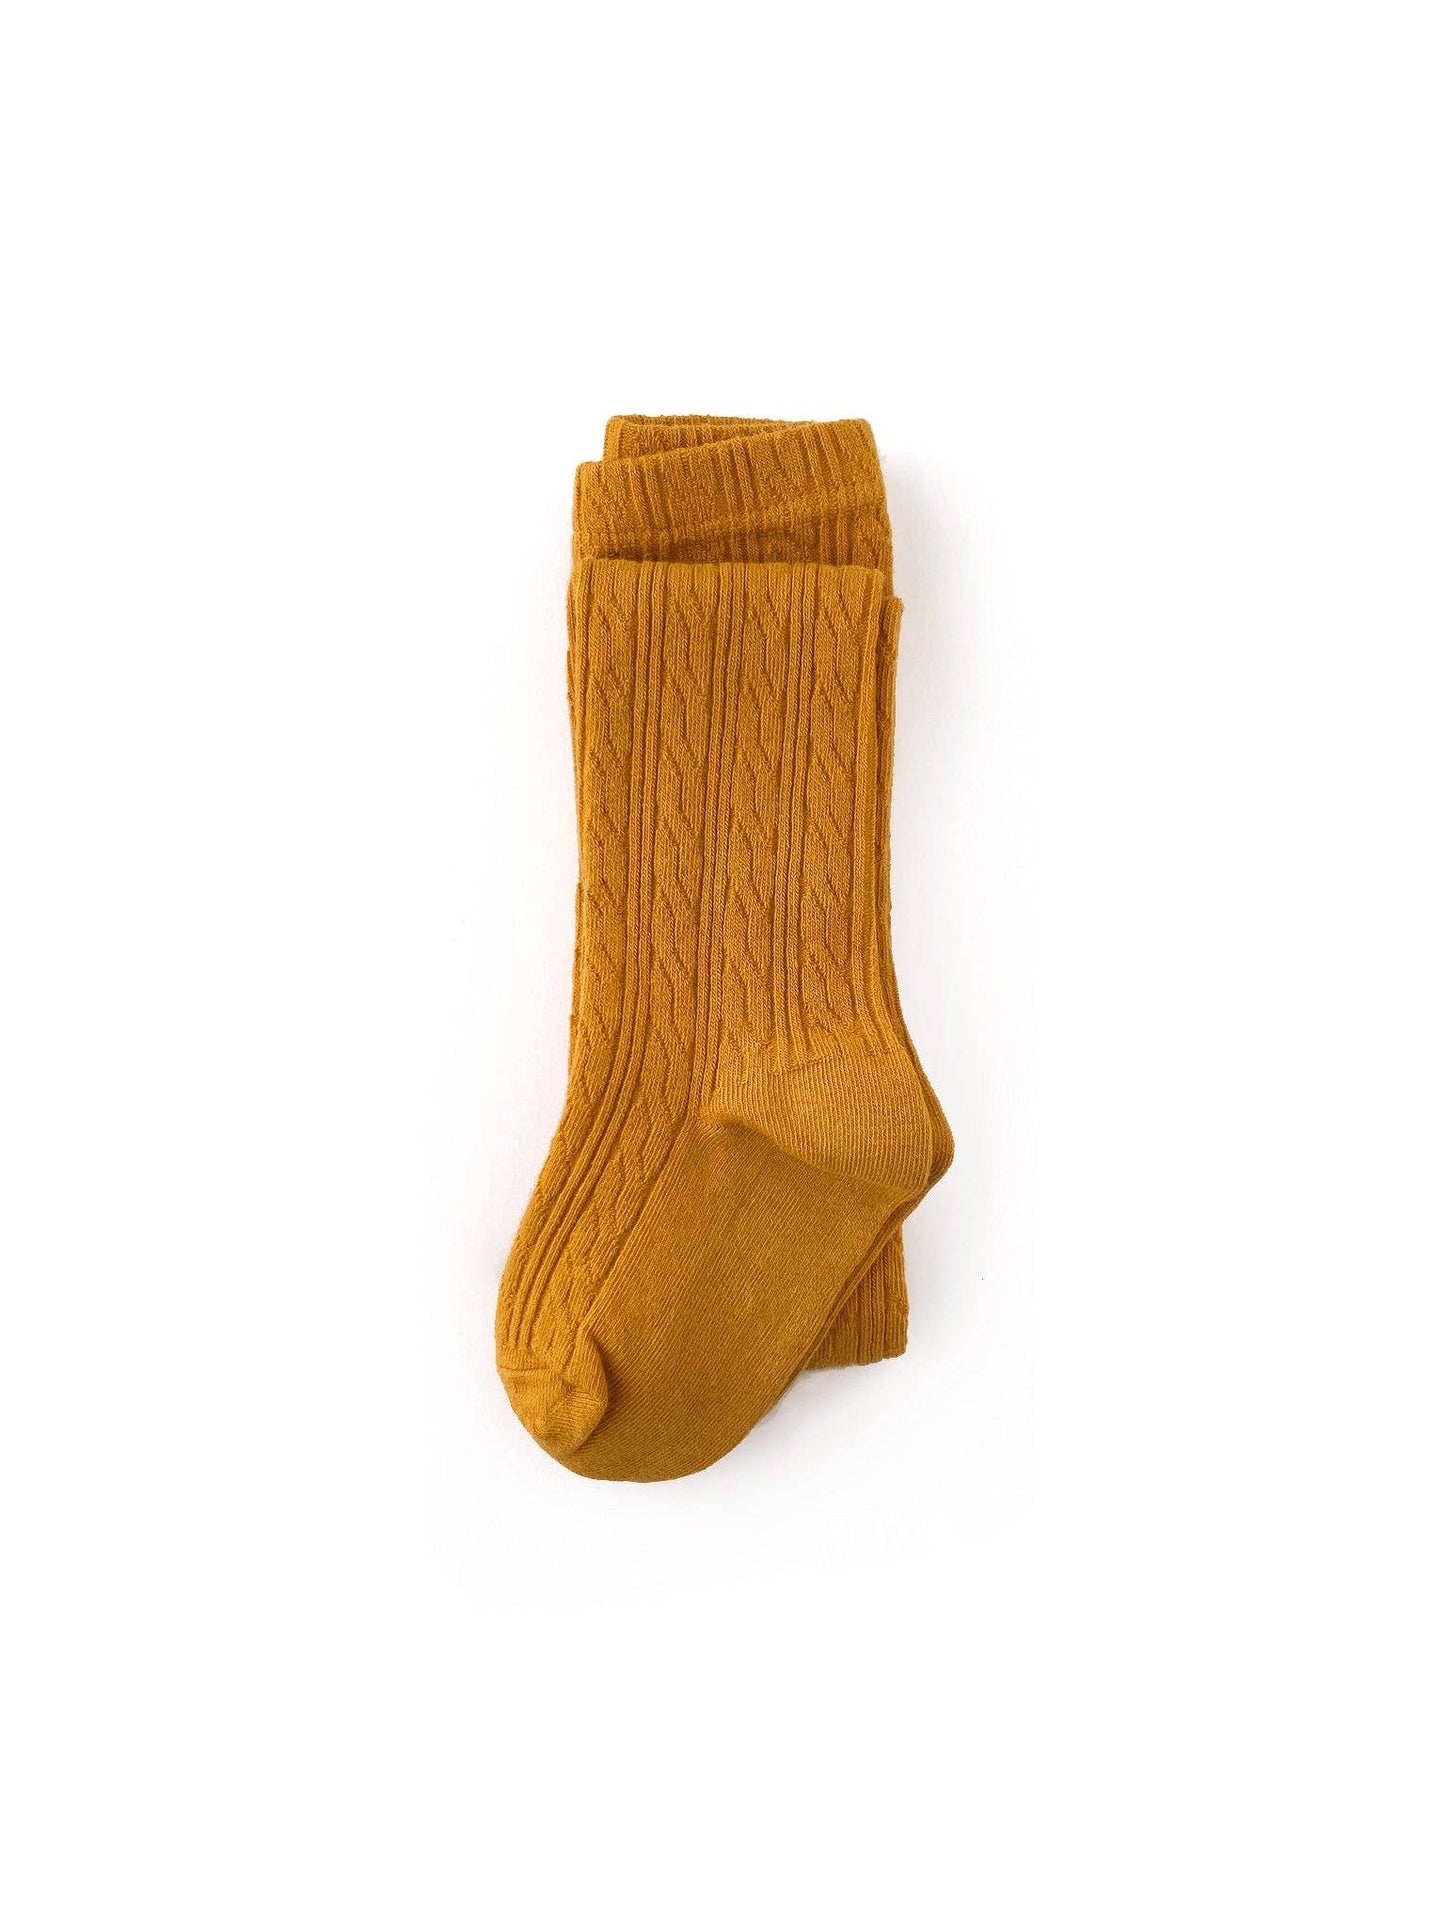 Little Stocking Co. - Marigold Yellow Cable Knit Tights